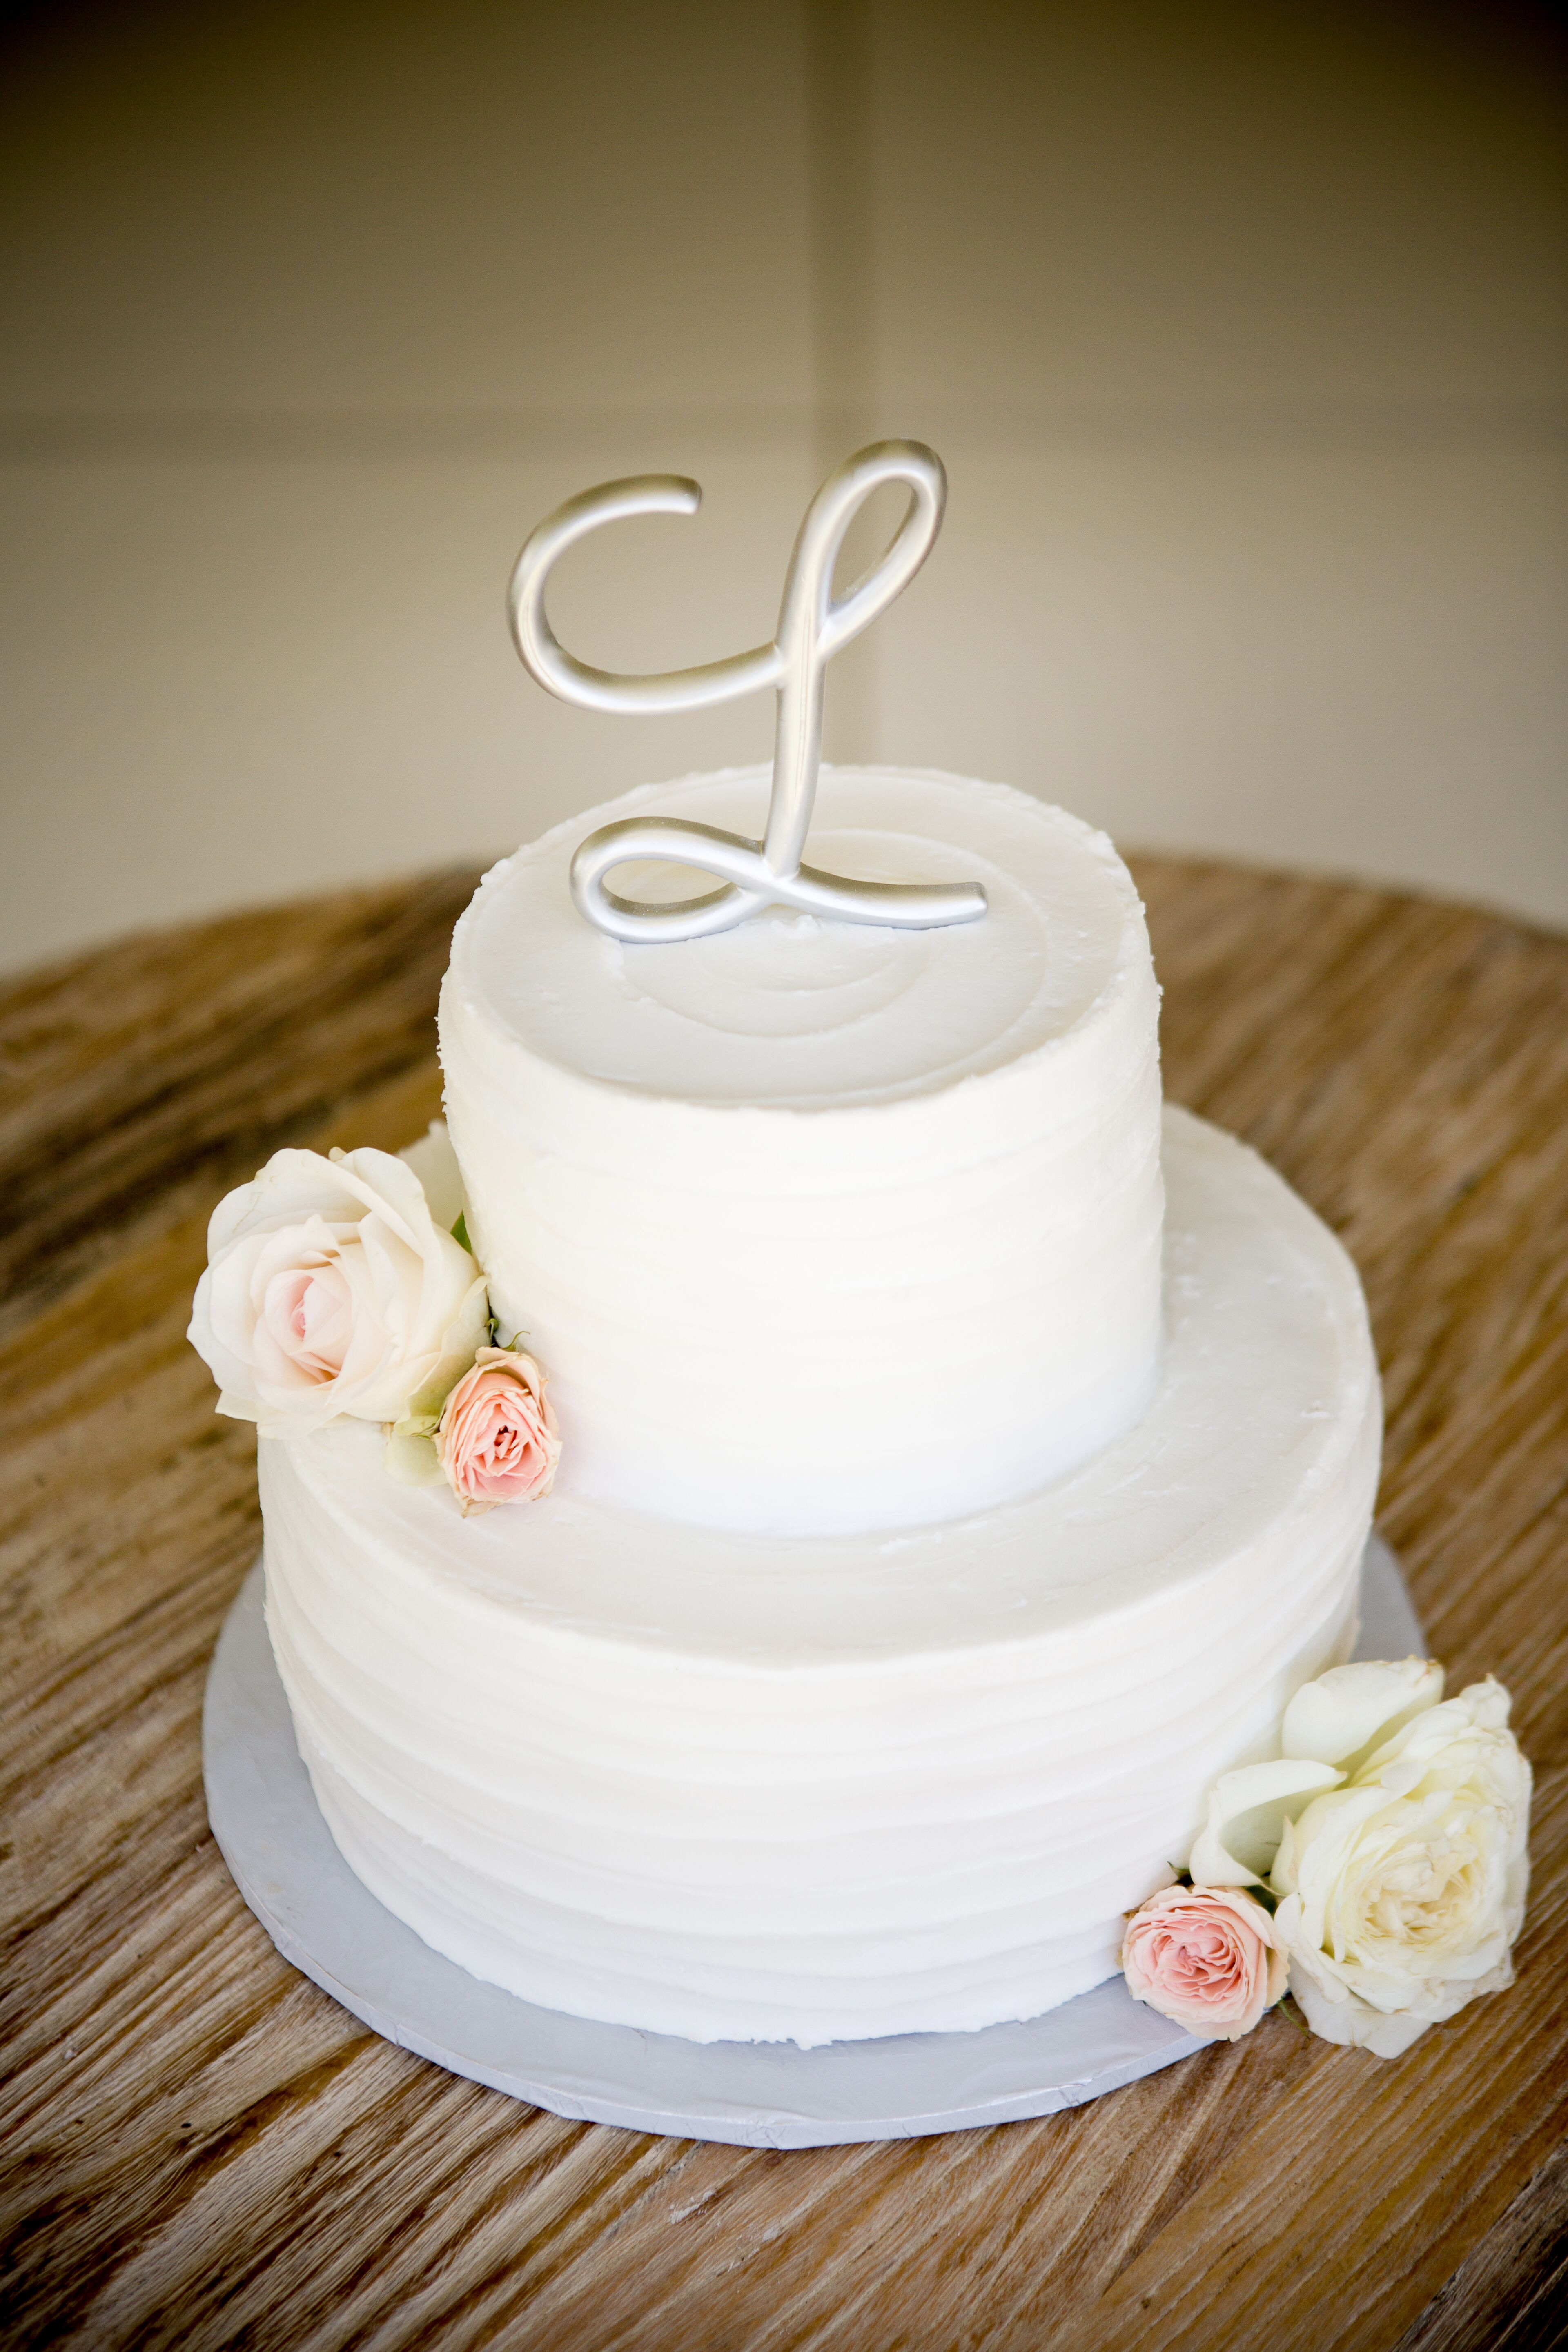 Timelessly Simple Wedding Cakes